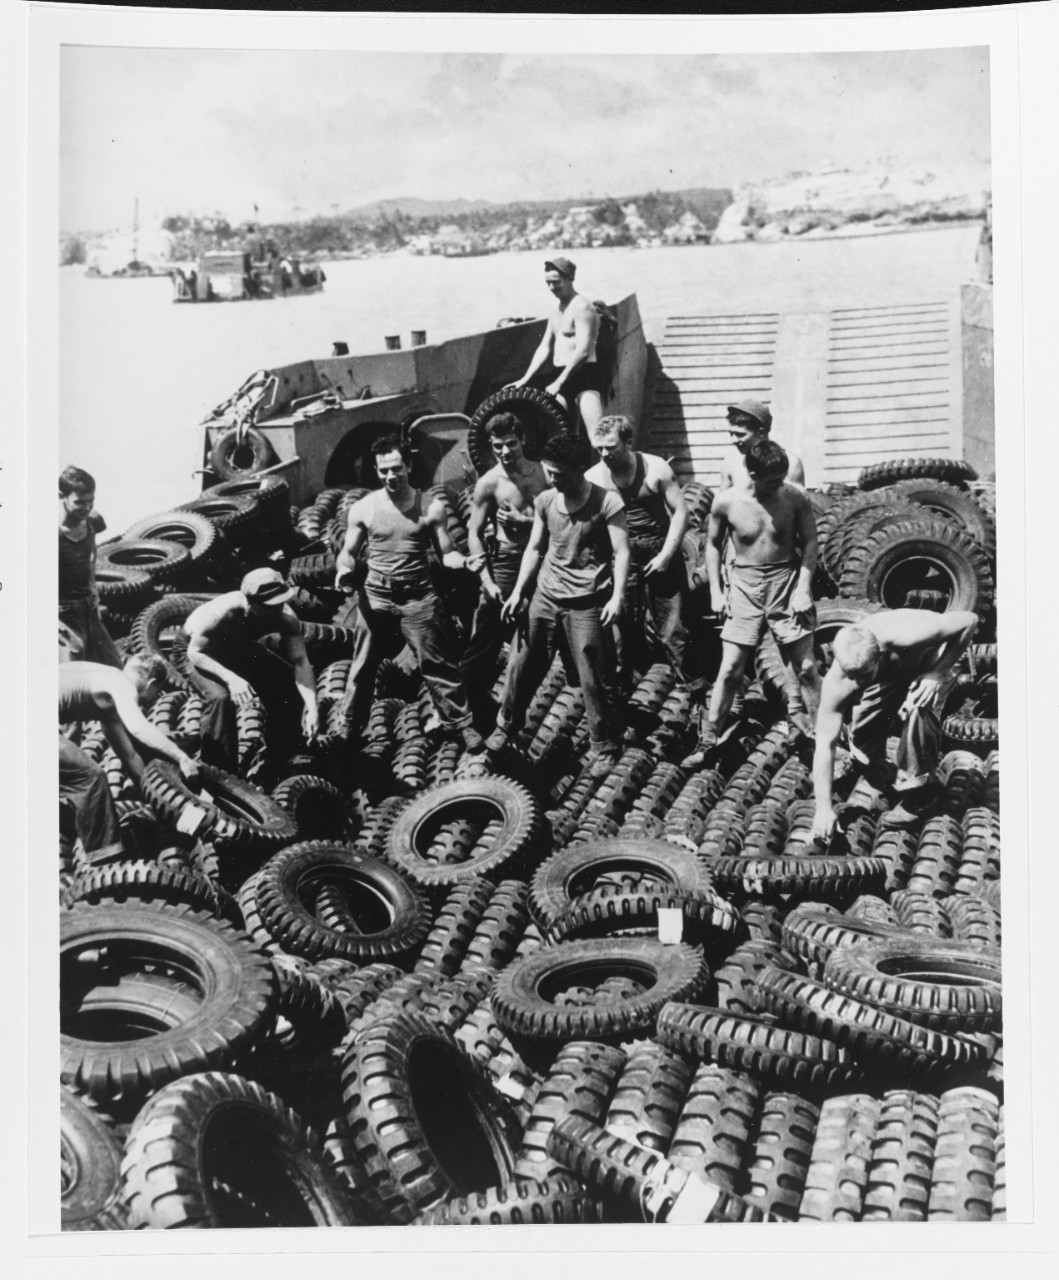 An LCT load of tires